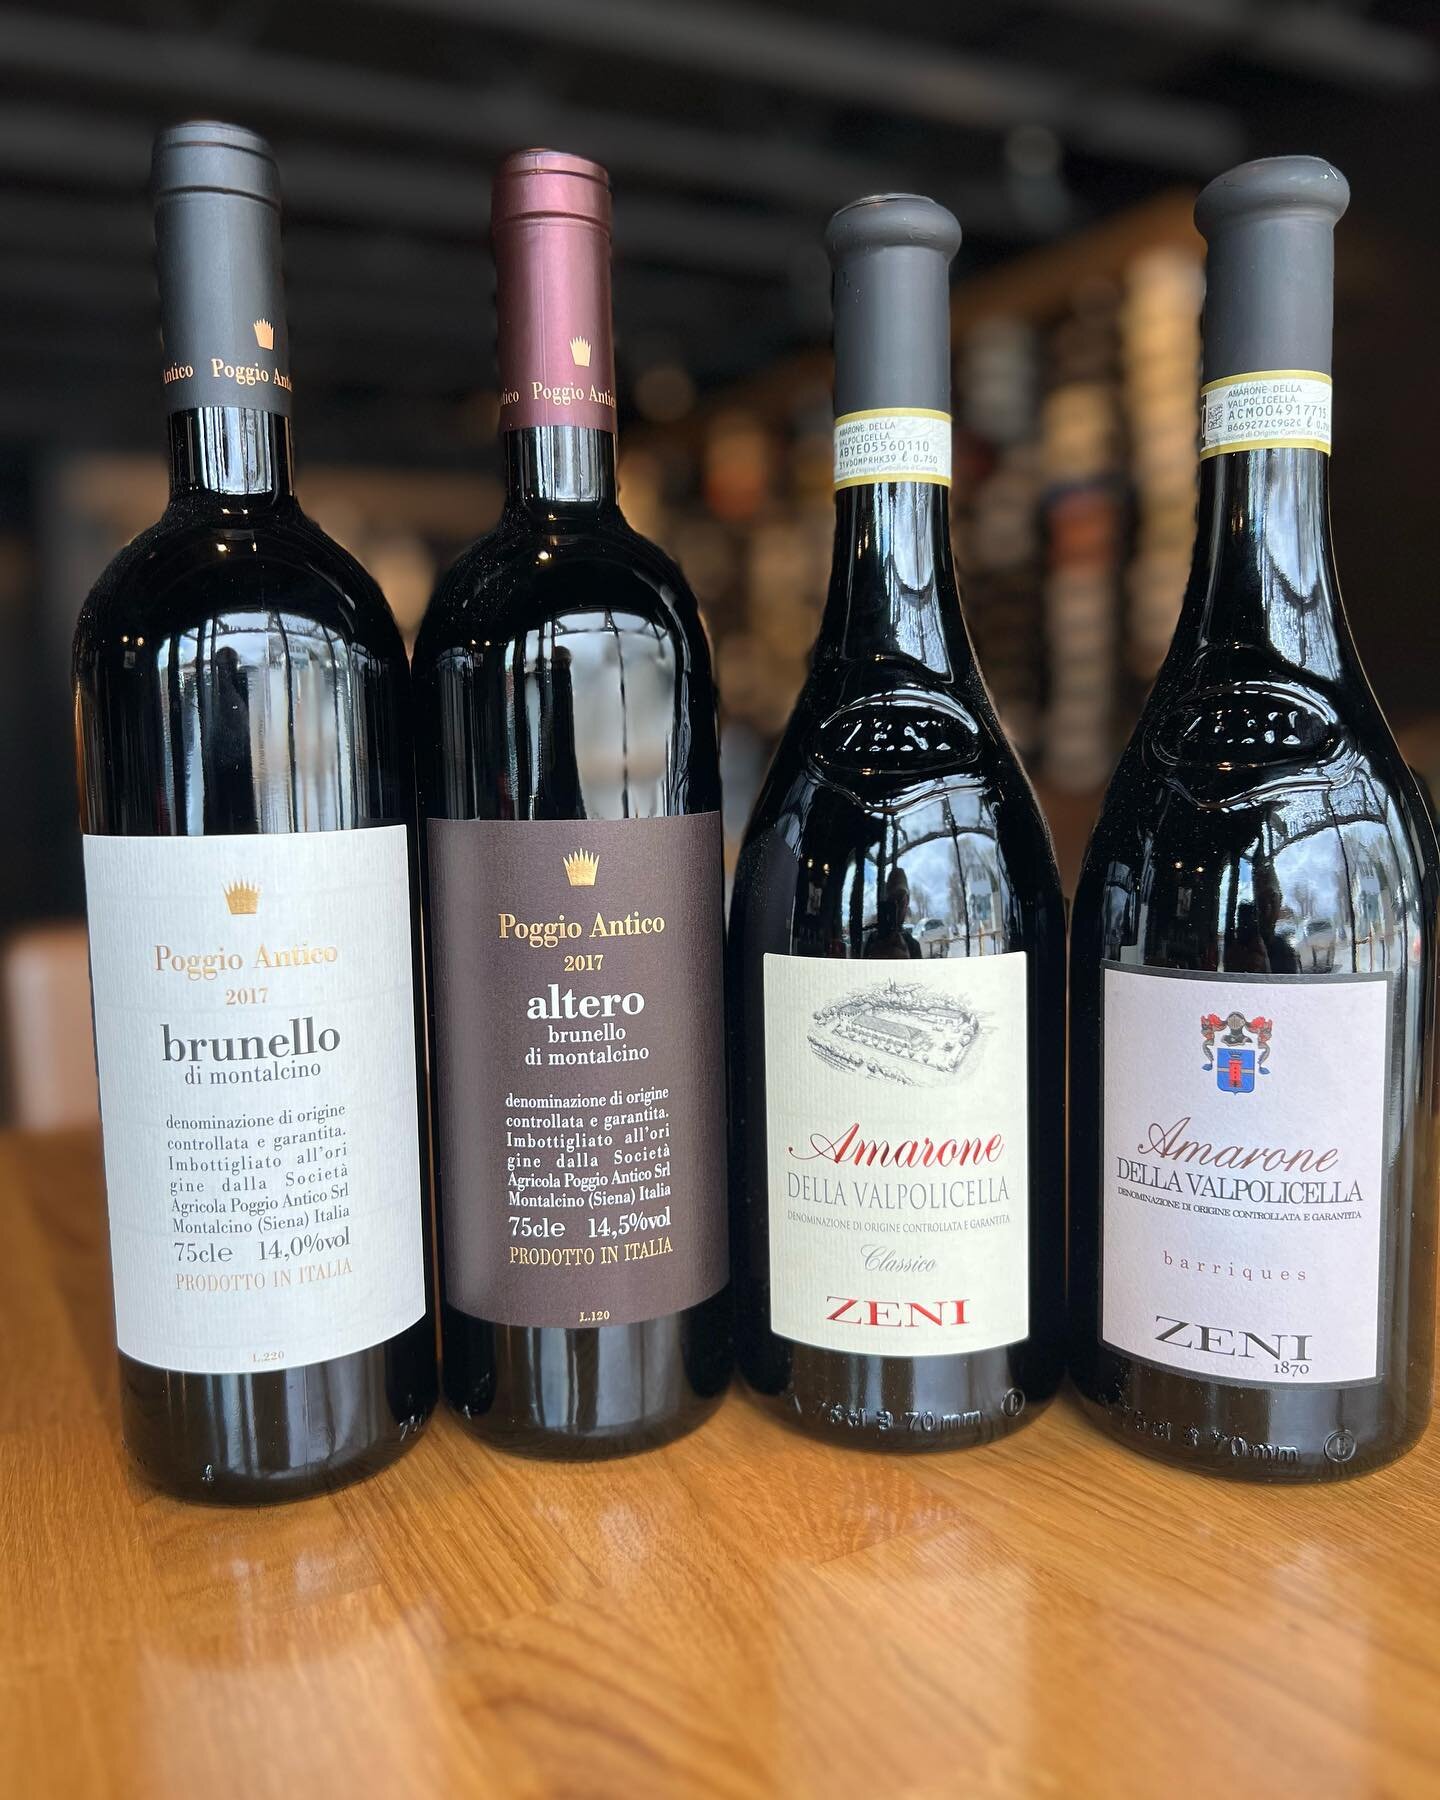 Join us Thursday, April 20th from 6pm - 8pm for an Italian Wine Tasting!!
Come taste through some of Italy&rsquo;s most iconic styles of wine with special guest Andrea Lucignani! From the sun-drenched forests of Montalcino in Tuscany that produce fin